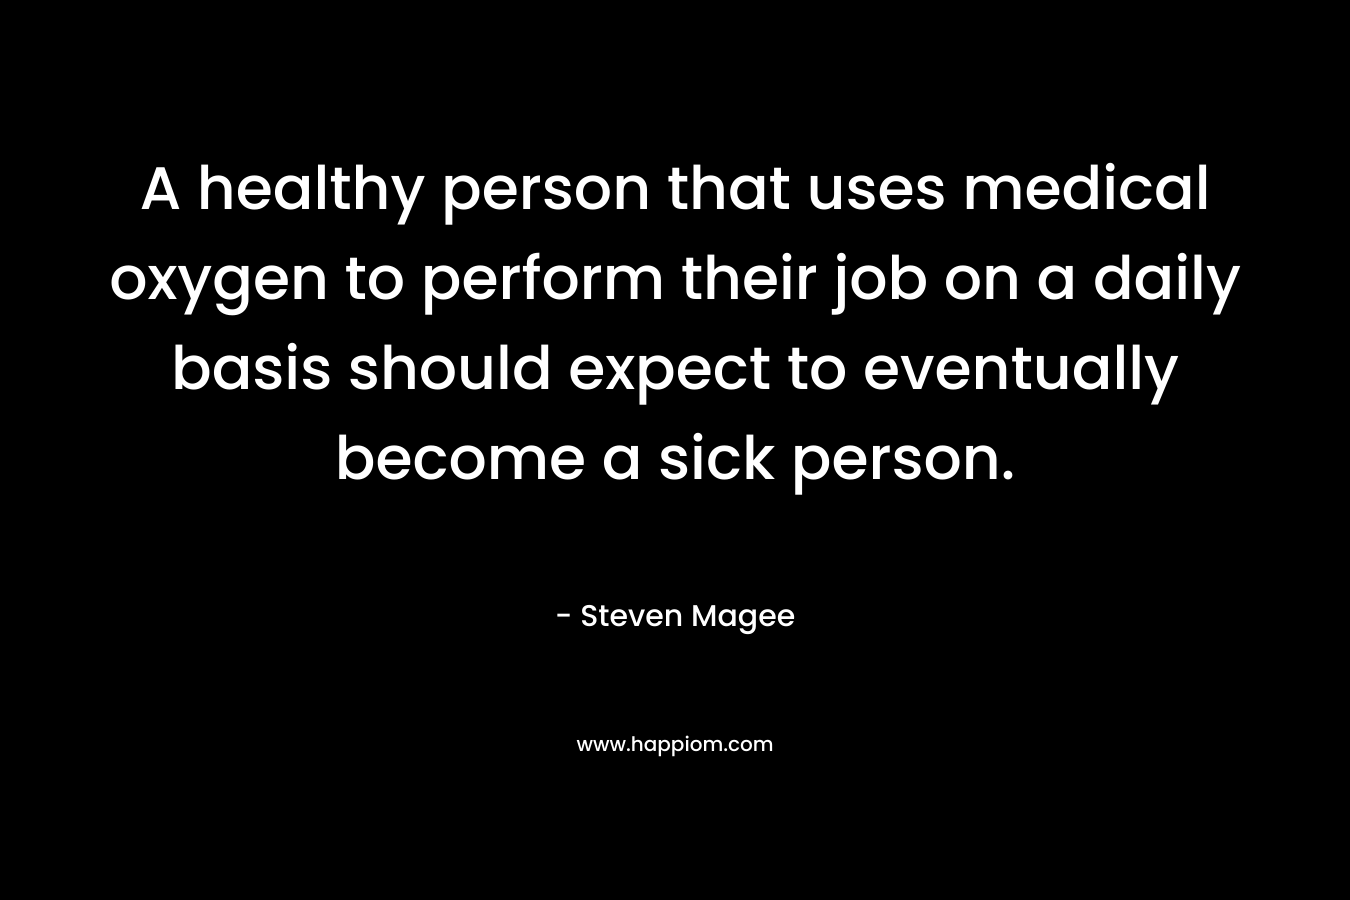 A healthy person that uses medical oxygen to perform their job on a daily basis should expect to eventually become a sick person. – Steven Magee